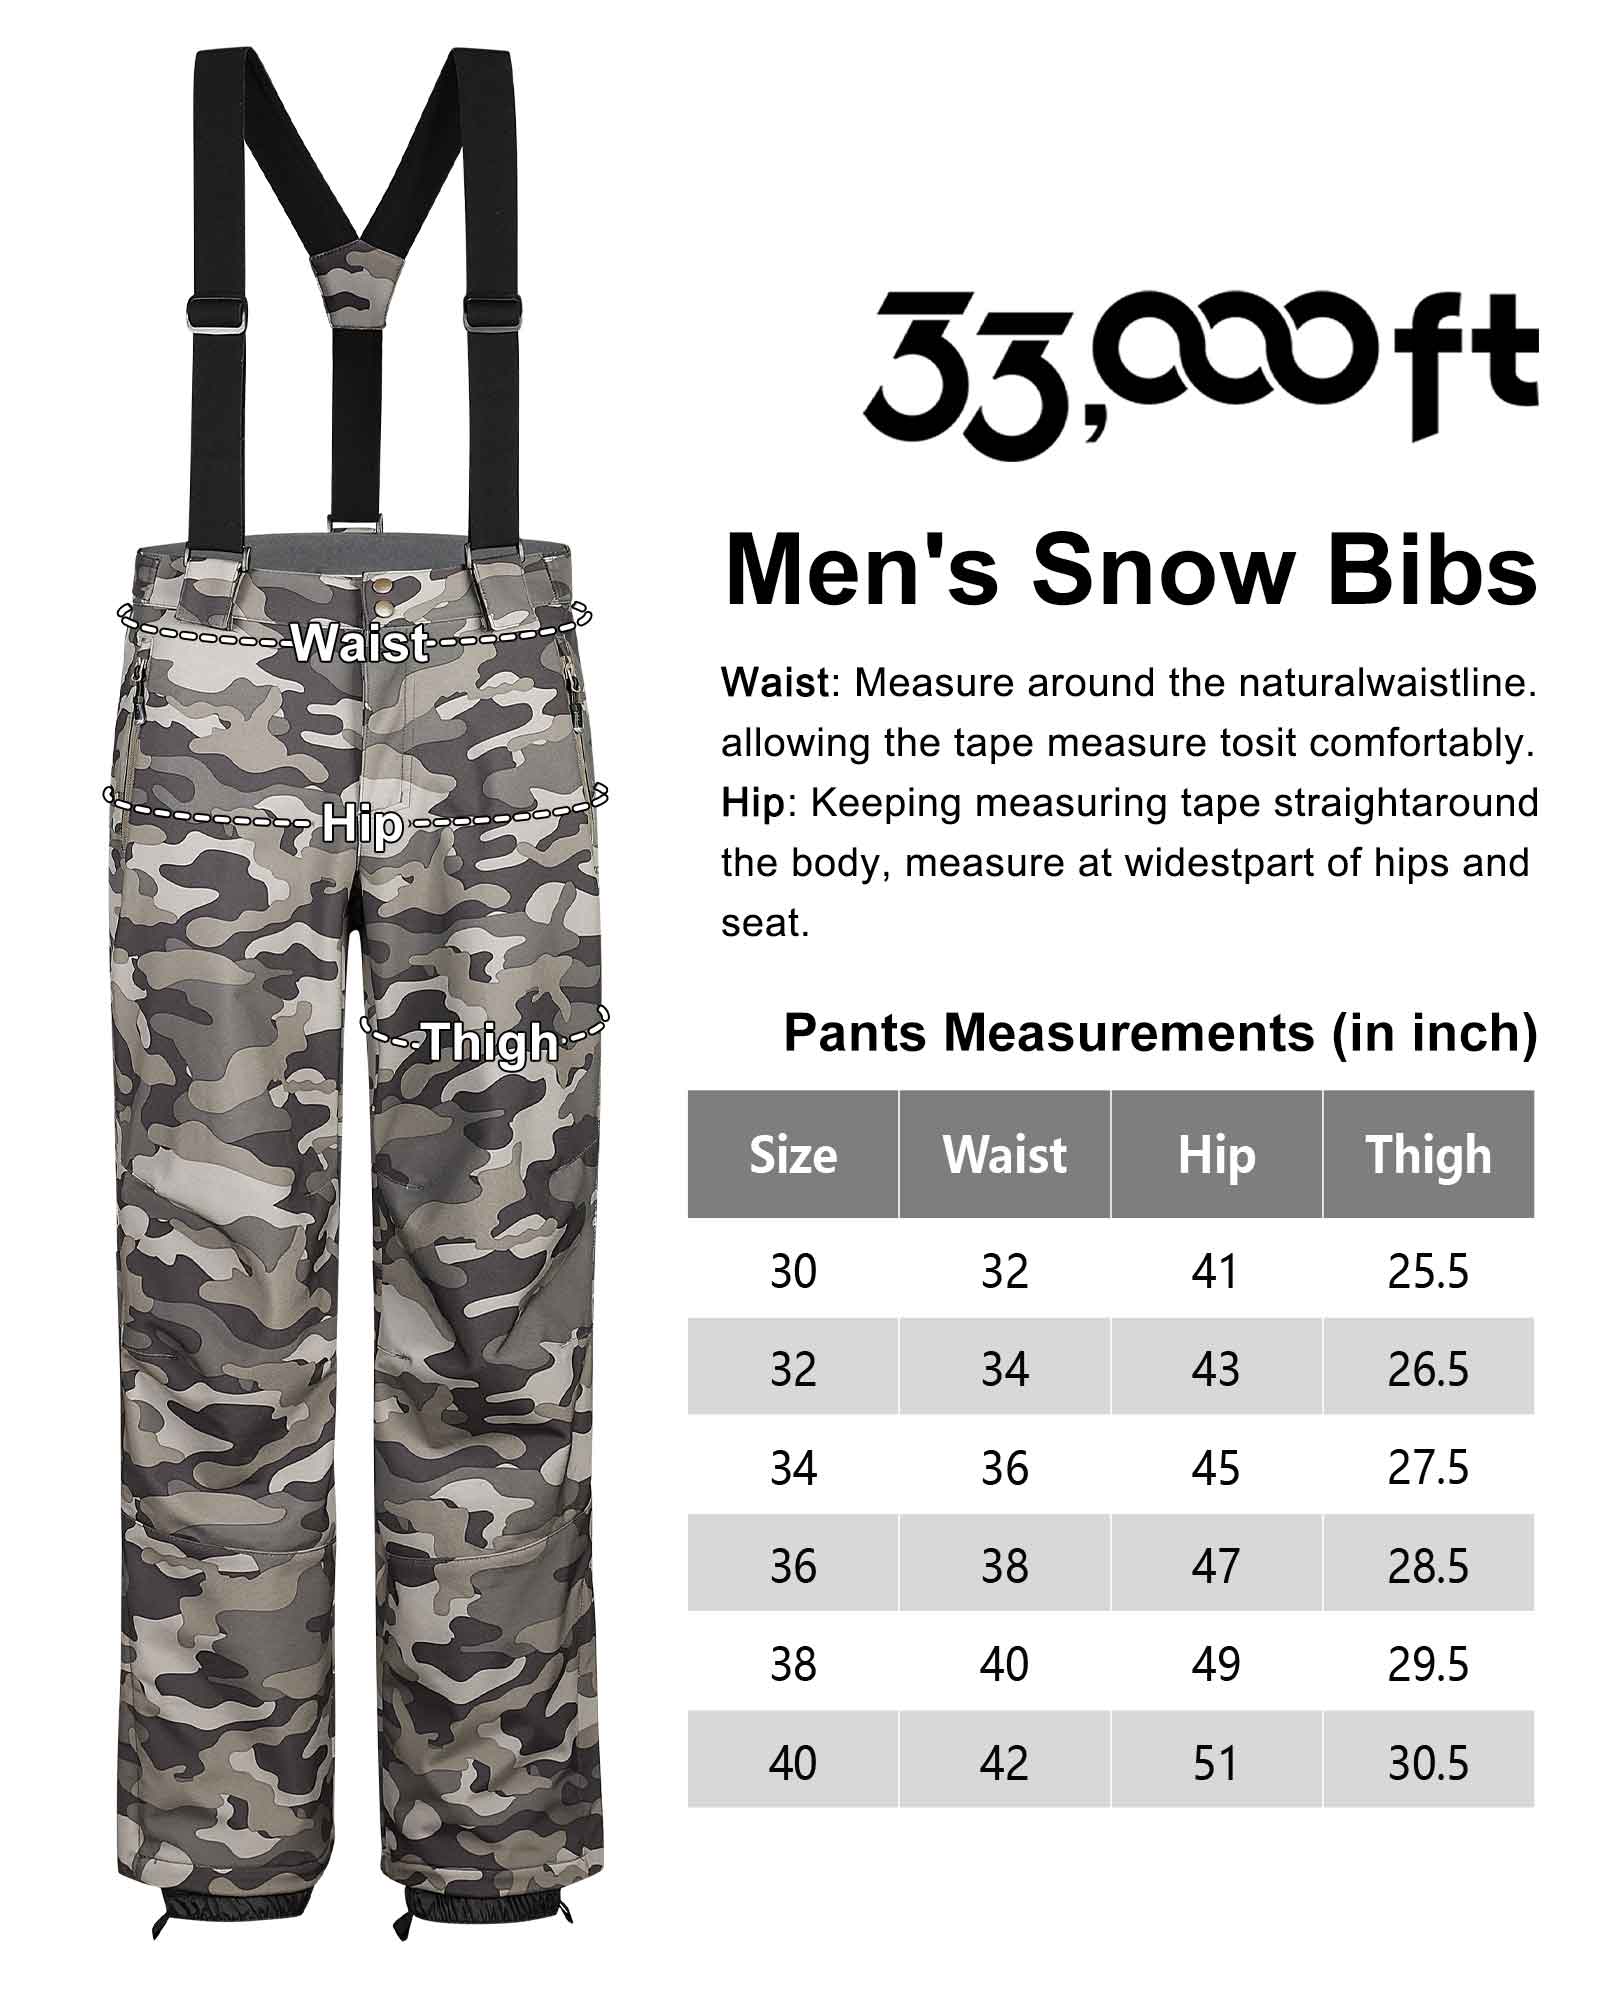 33,000ft Womens Snow Bibs Waterproof Insulated Snow Pants with Fleece  Lined, Windproof Ski Pants Overalls for Snowboard